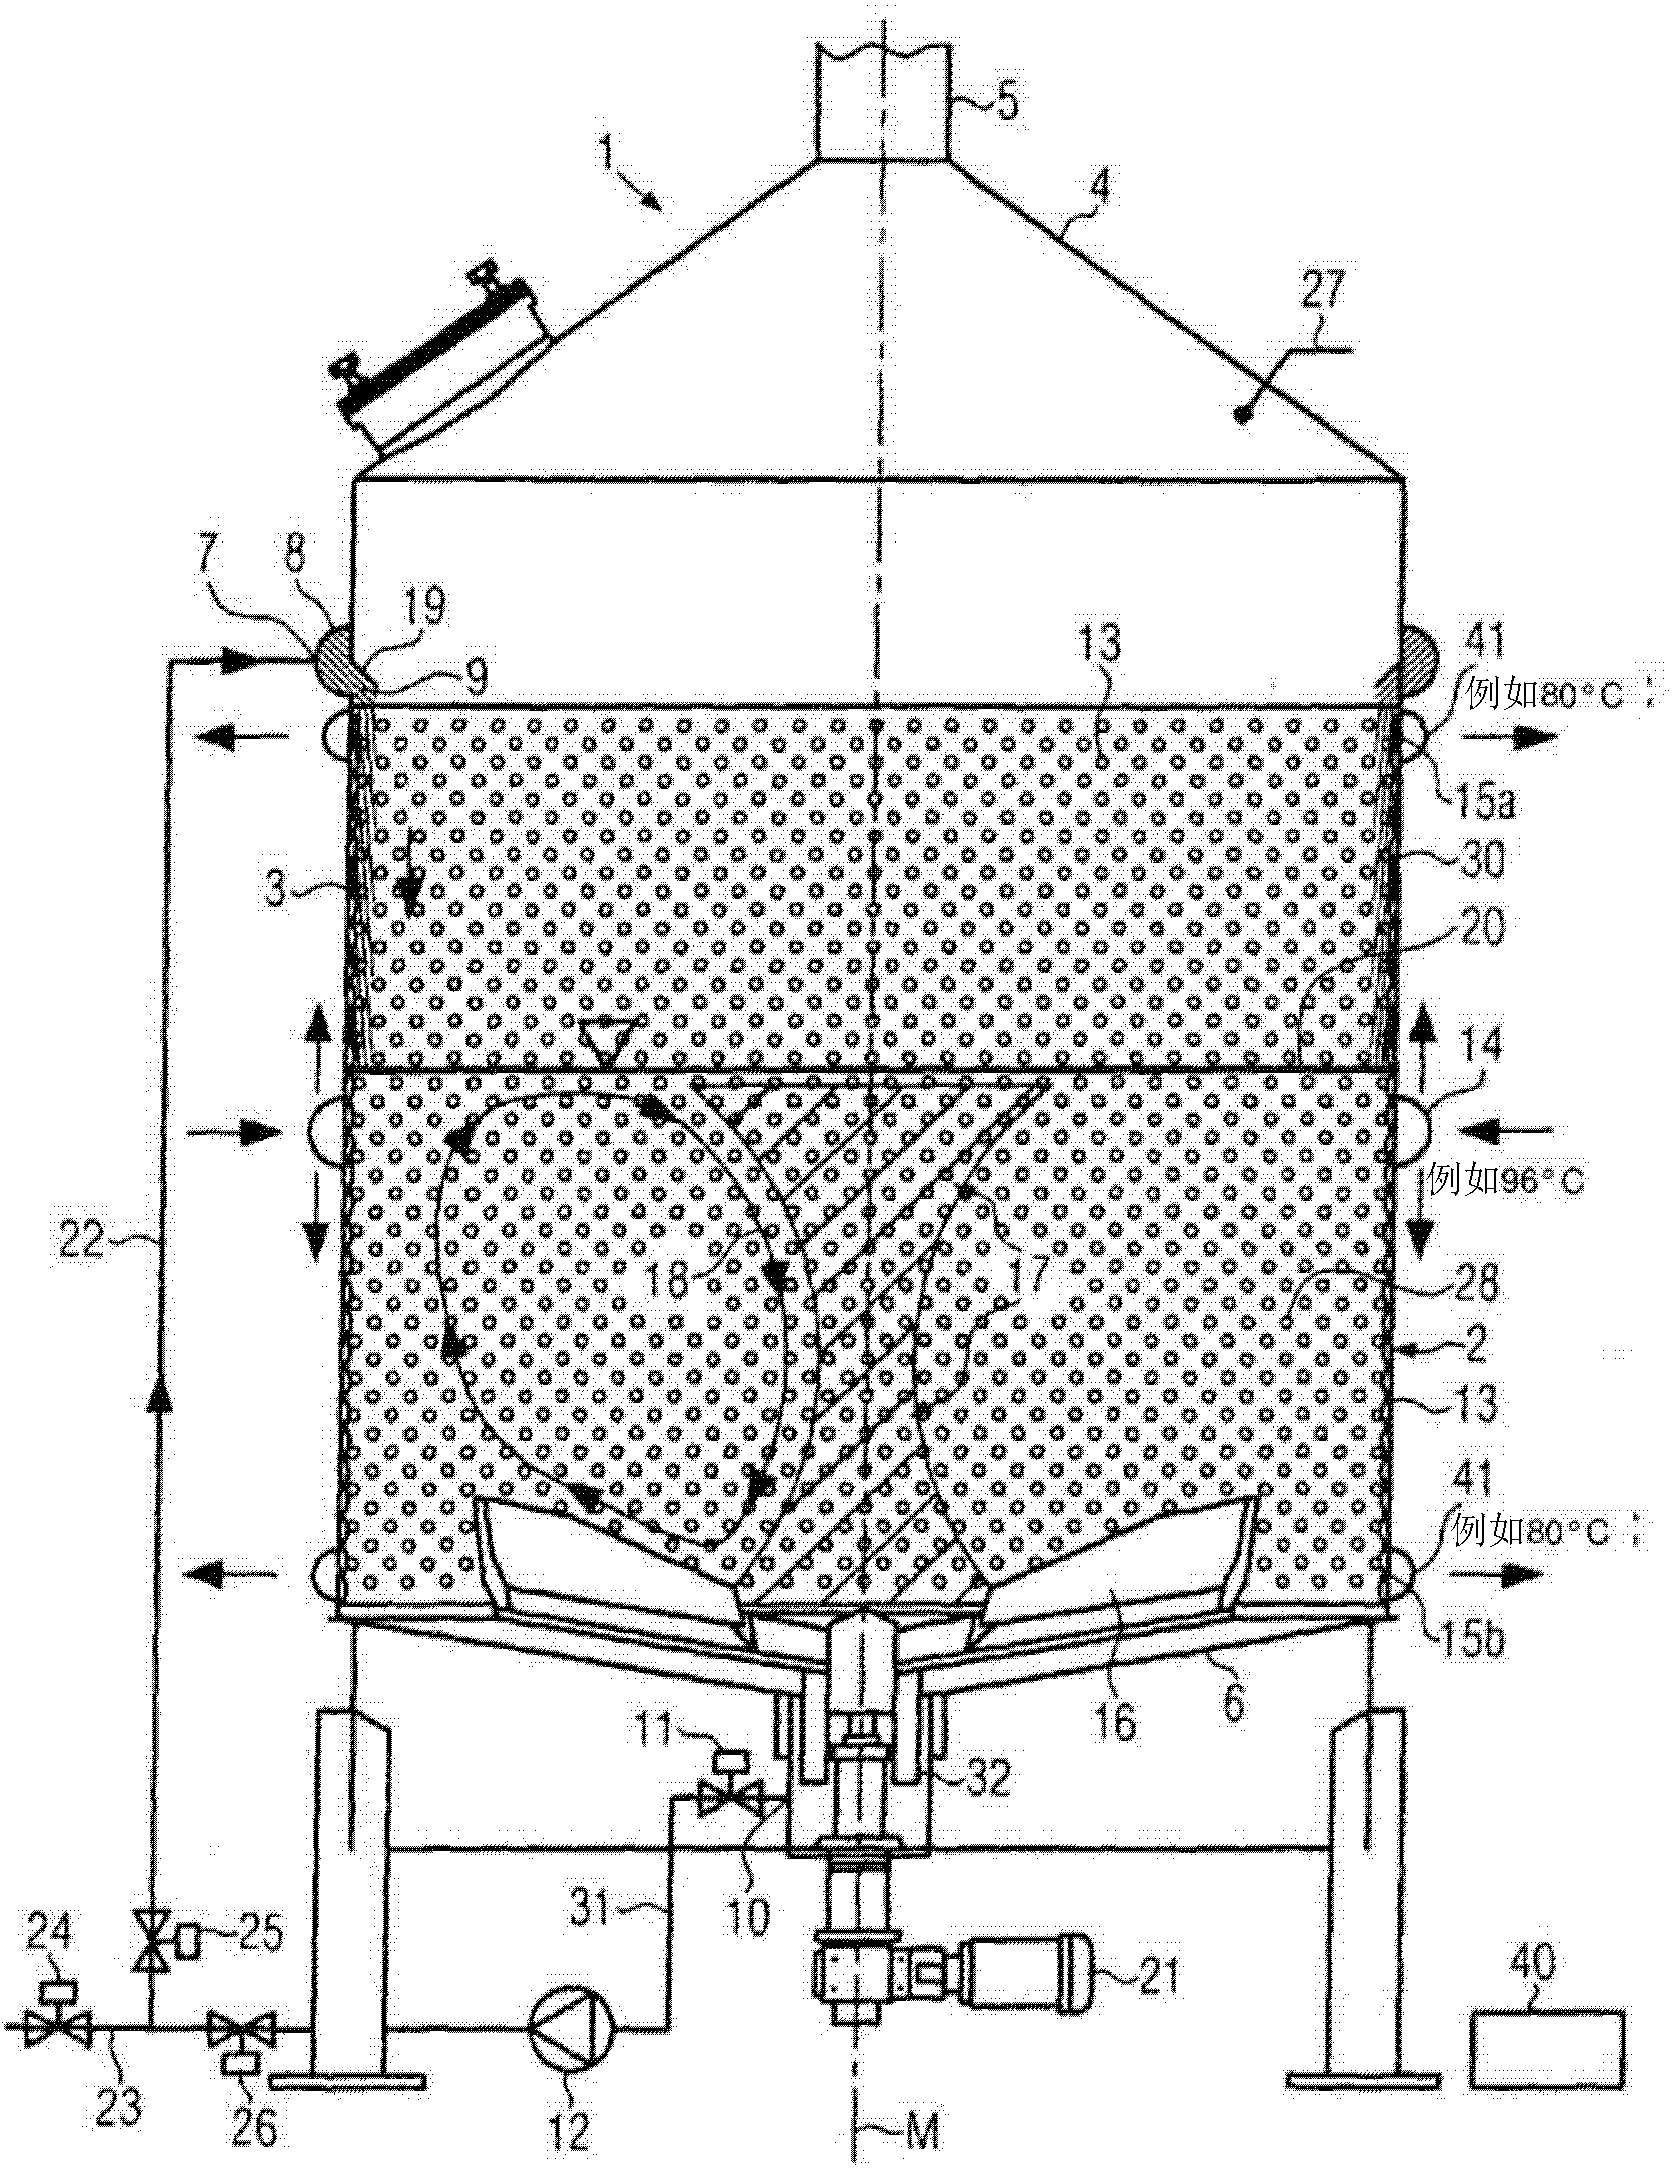 Method and device in particular for mashing in the production of beer